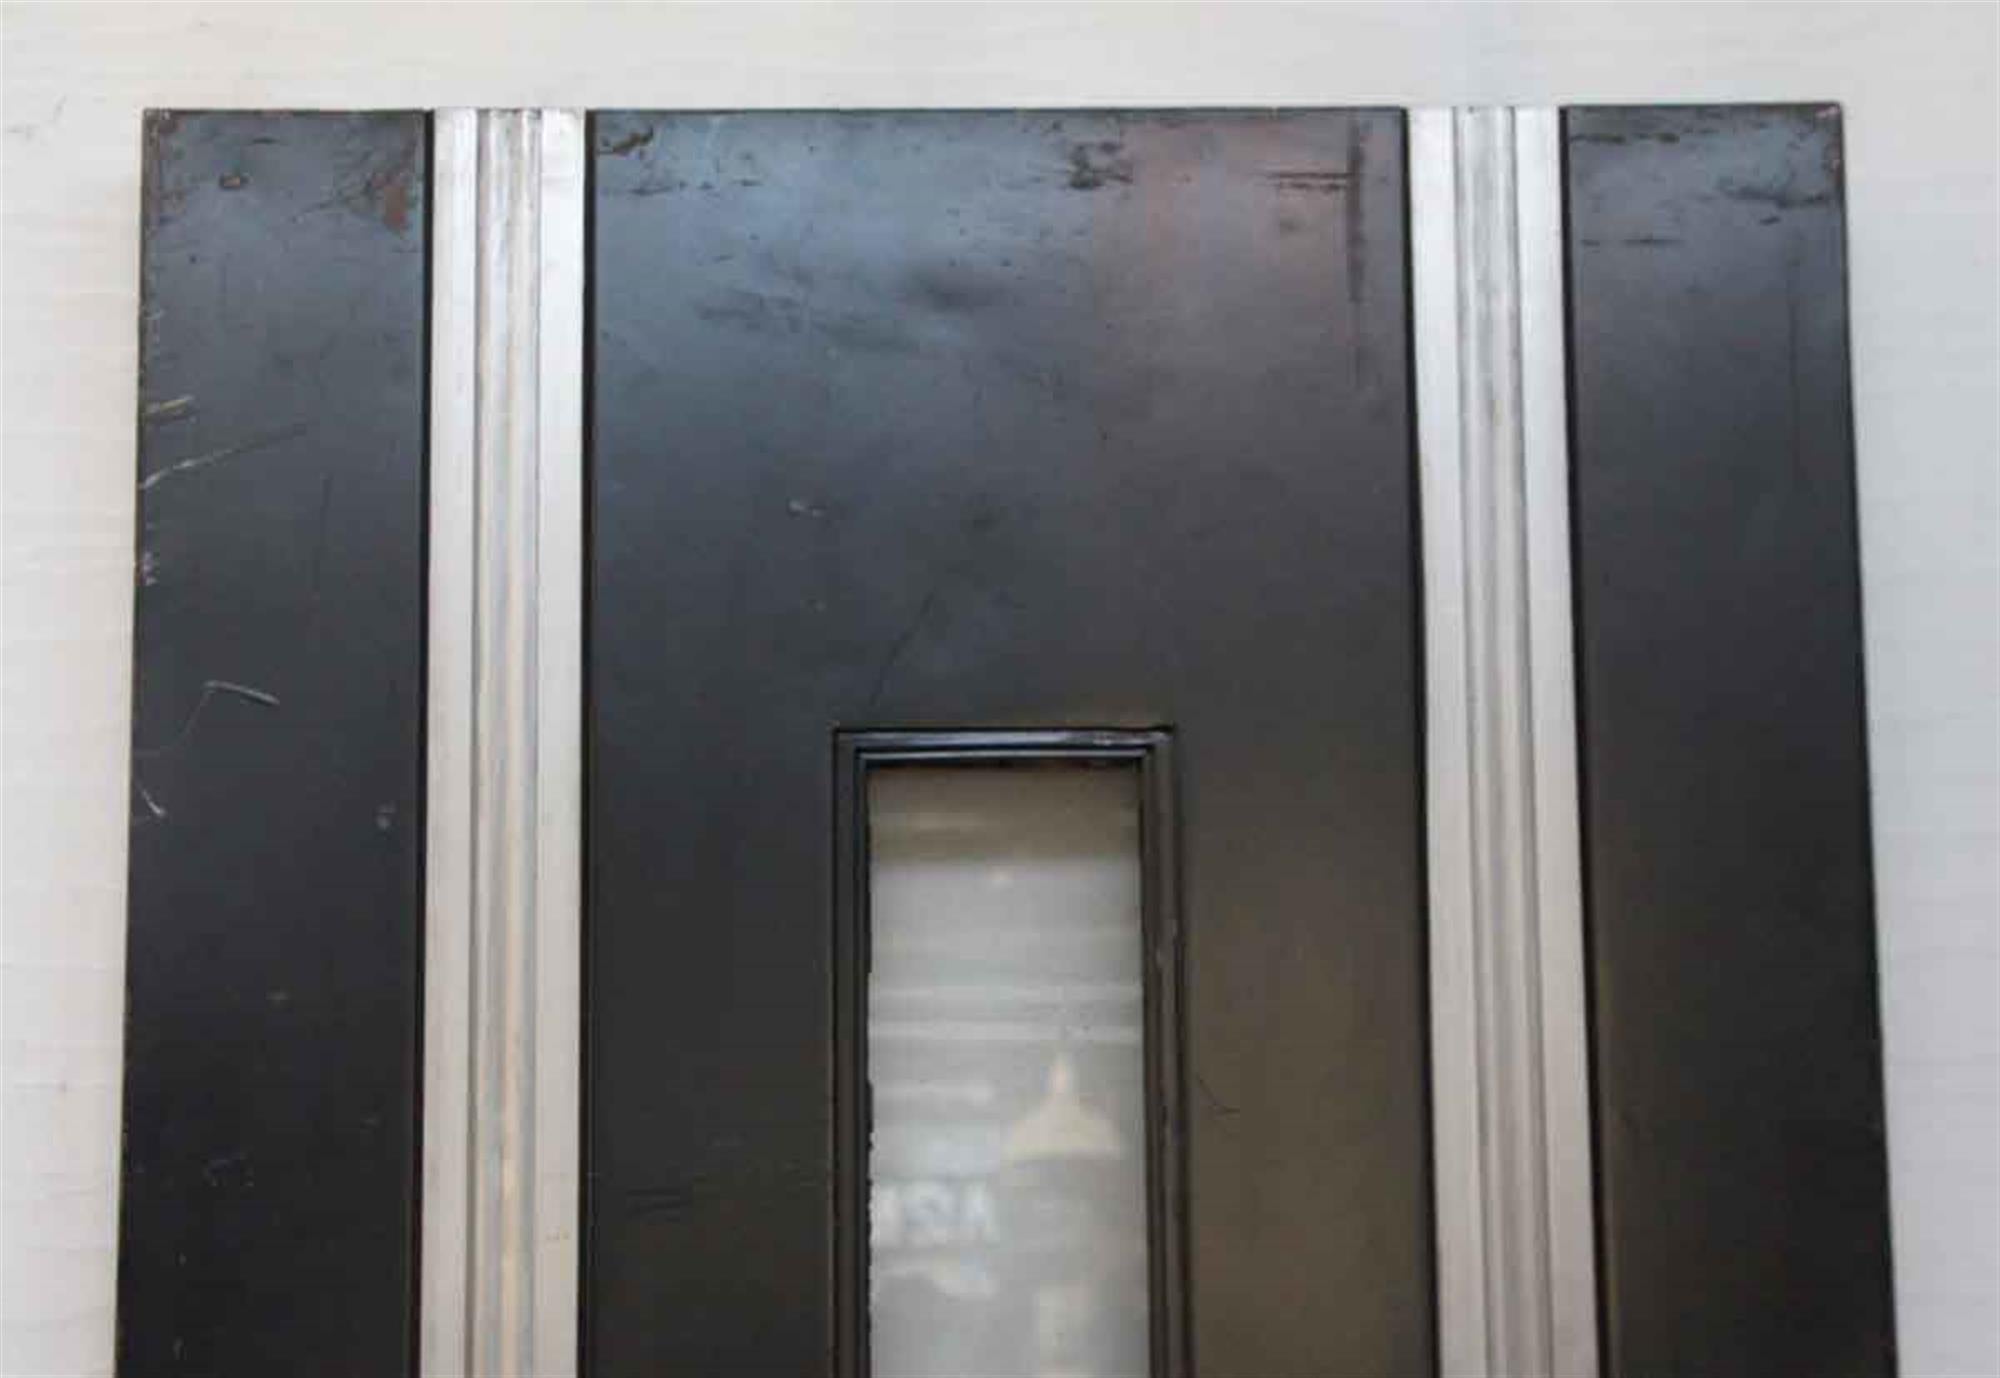 Art Deco black metal door with deco silver details and one thin glass strip in the center. From the 1930s Hayden Planetarium. This can be seen at our 1800 South Grand Ave location in Downtown LA.